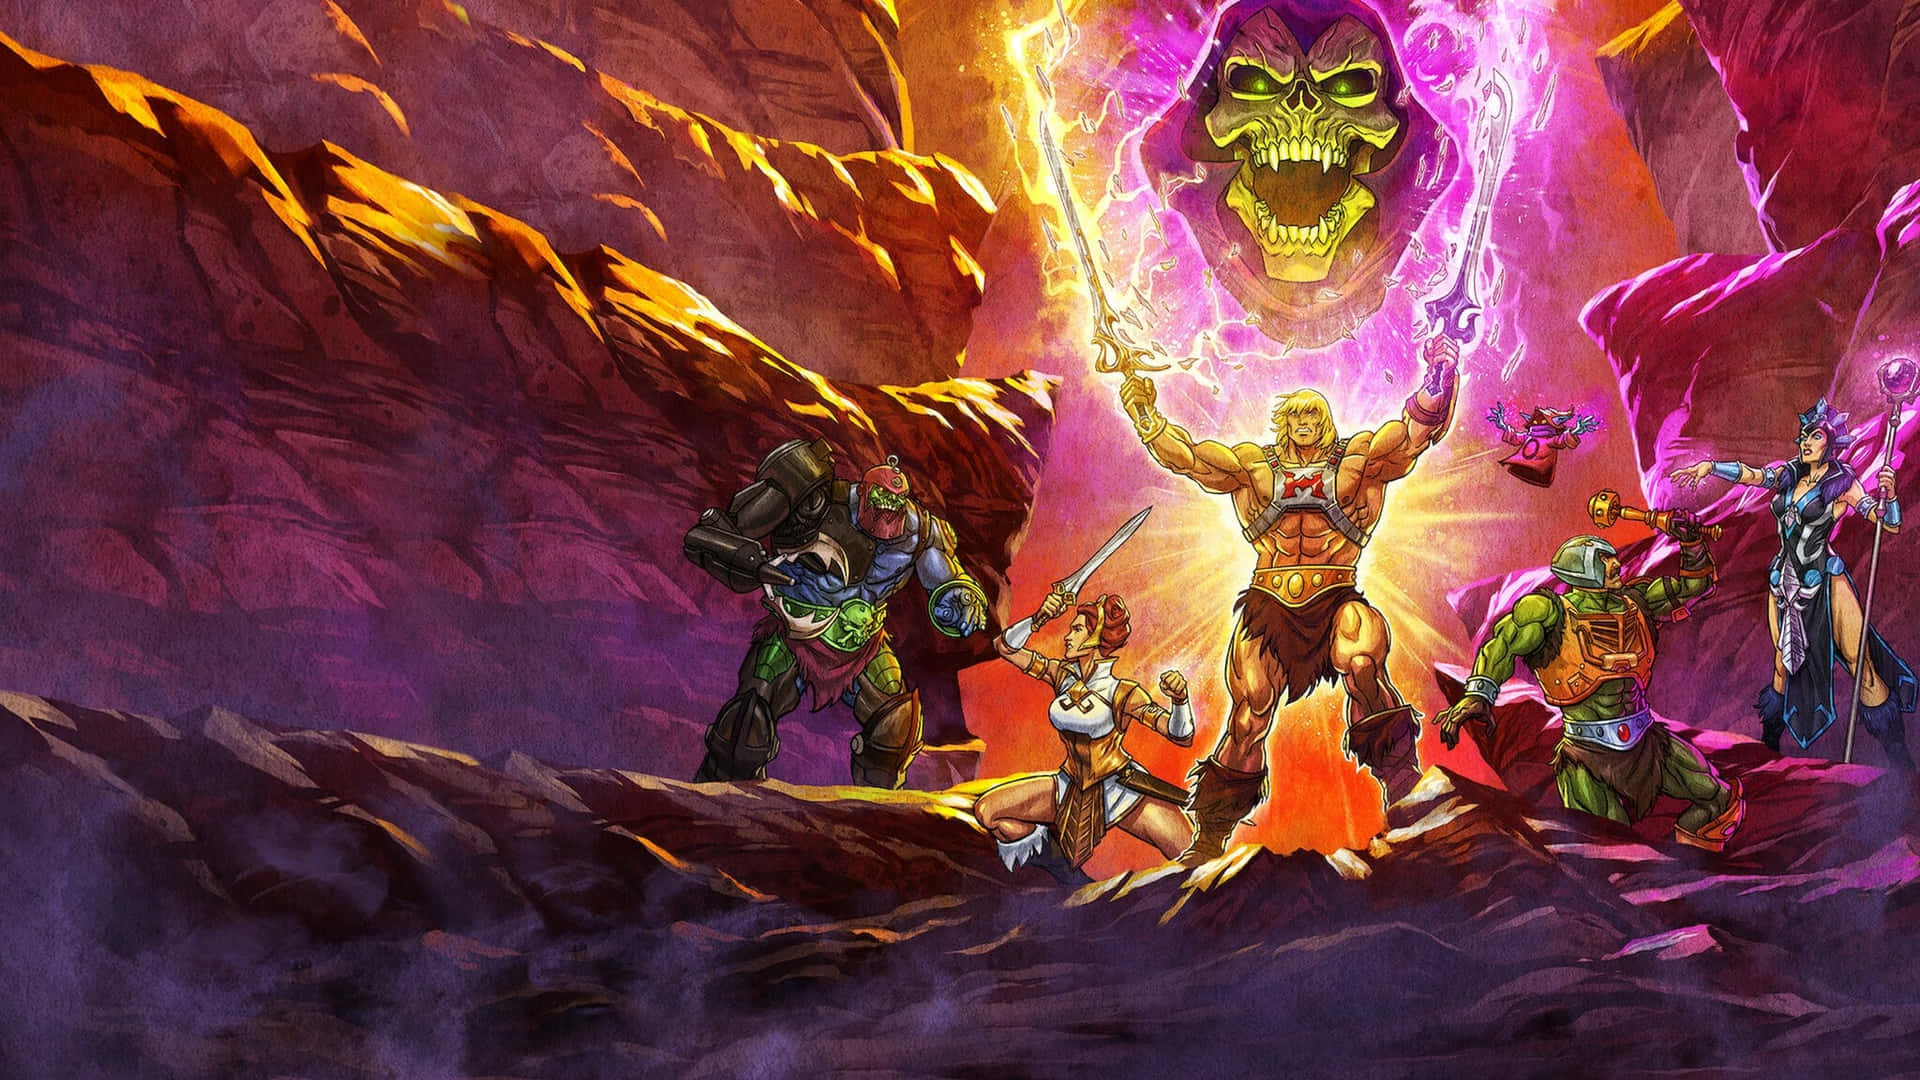 Masters Of The Universe - A New Video Game